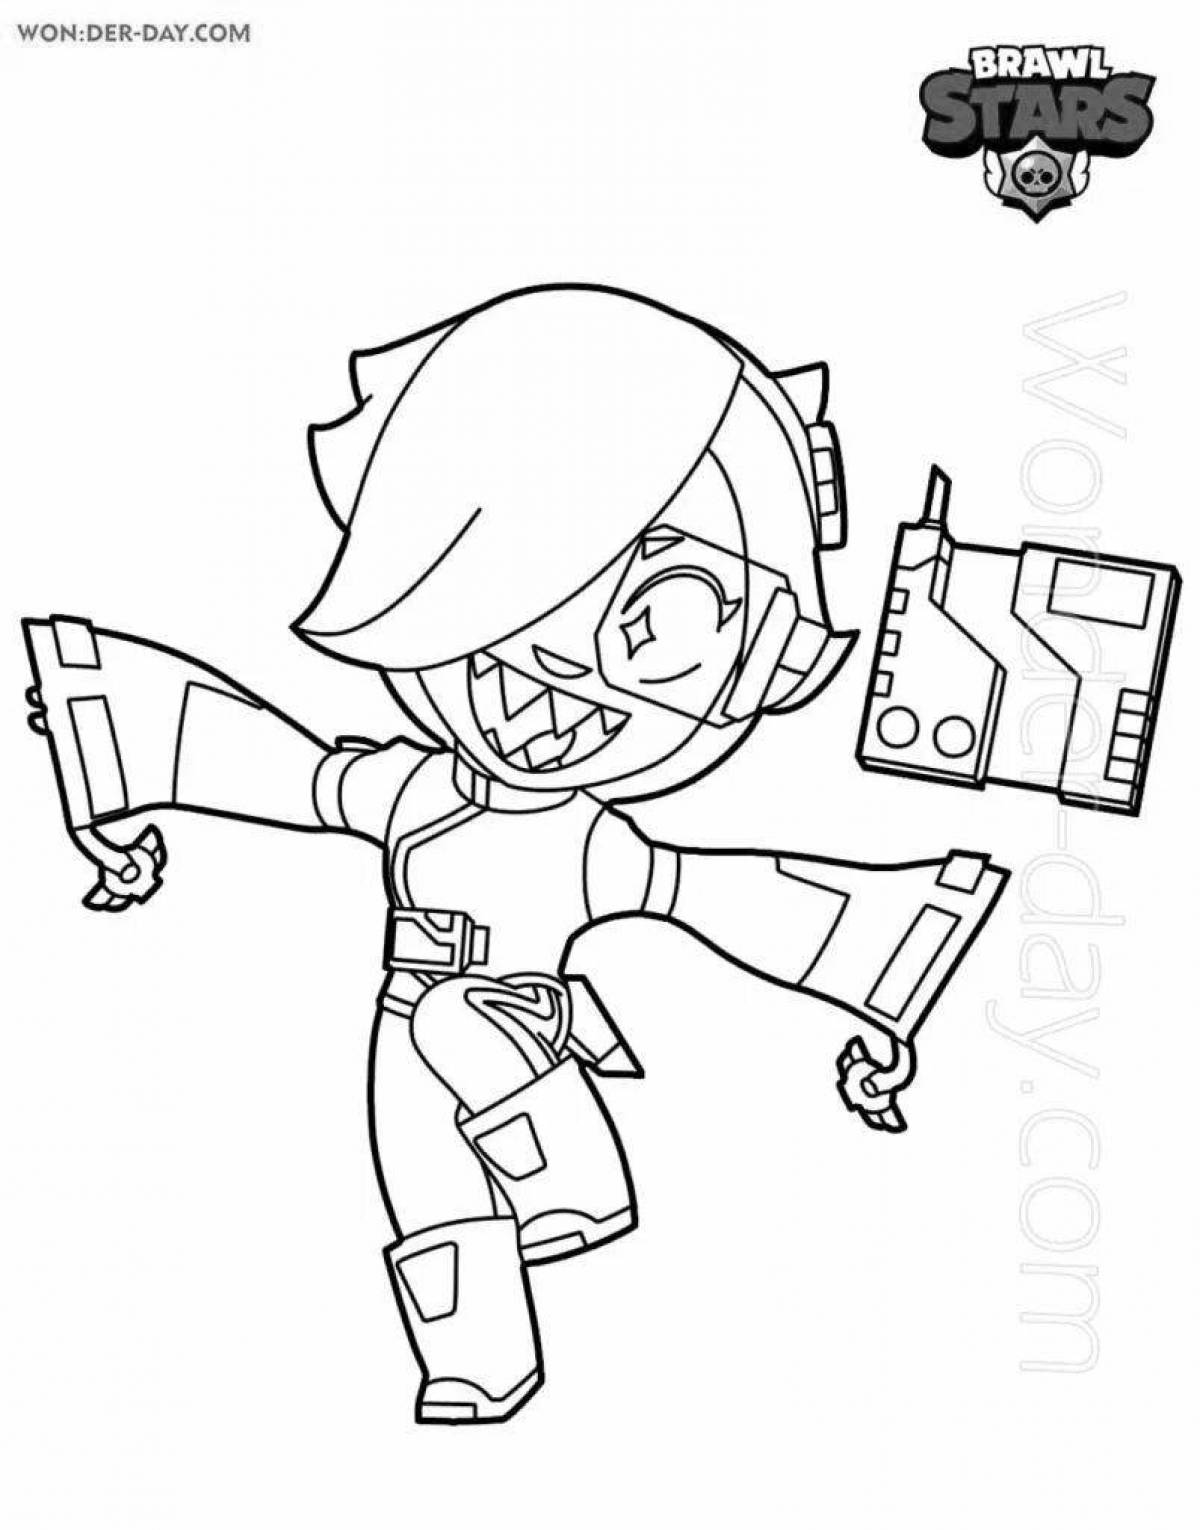 Colette from brawl stars #3